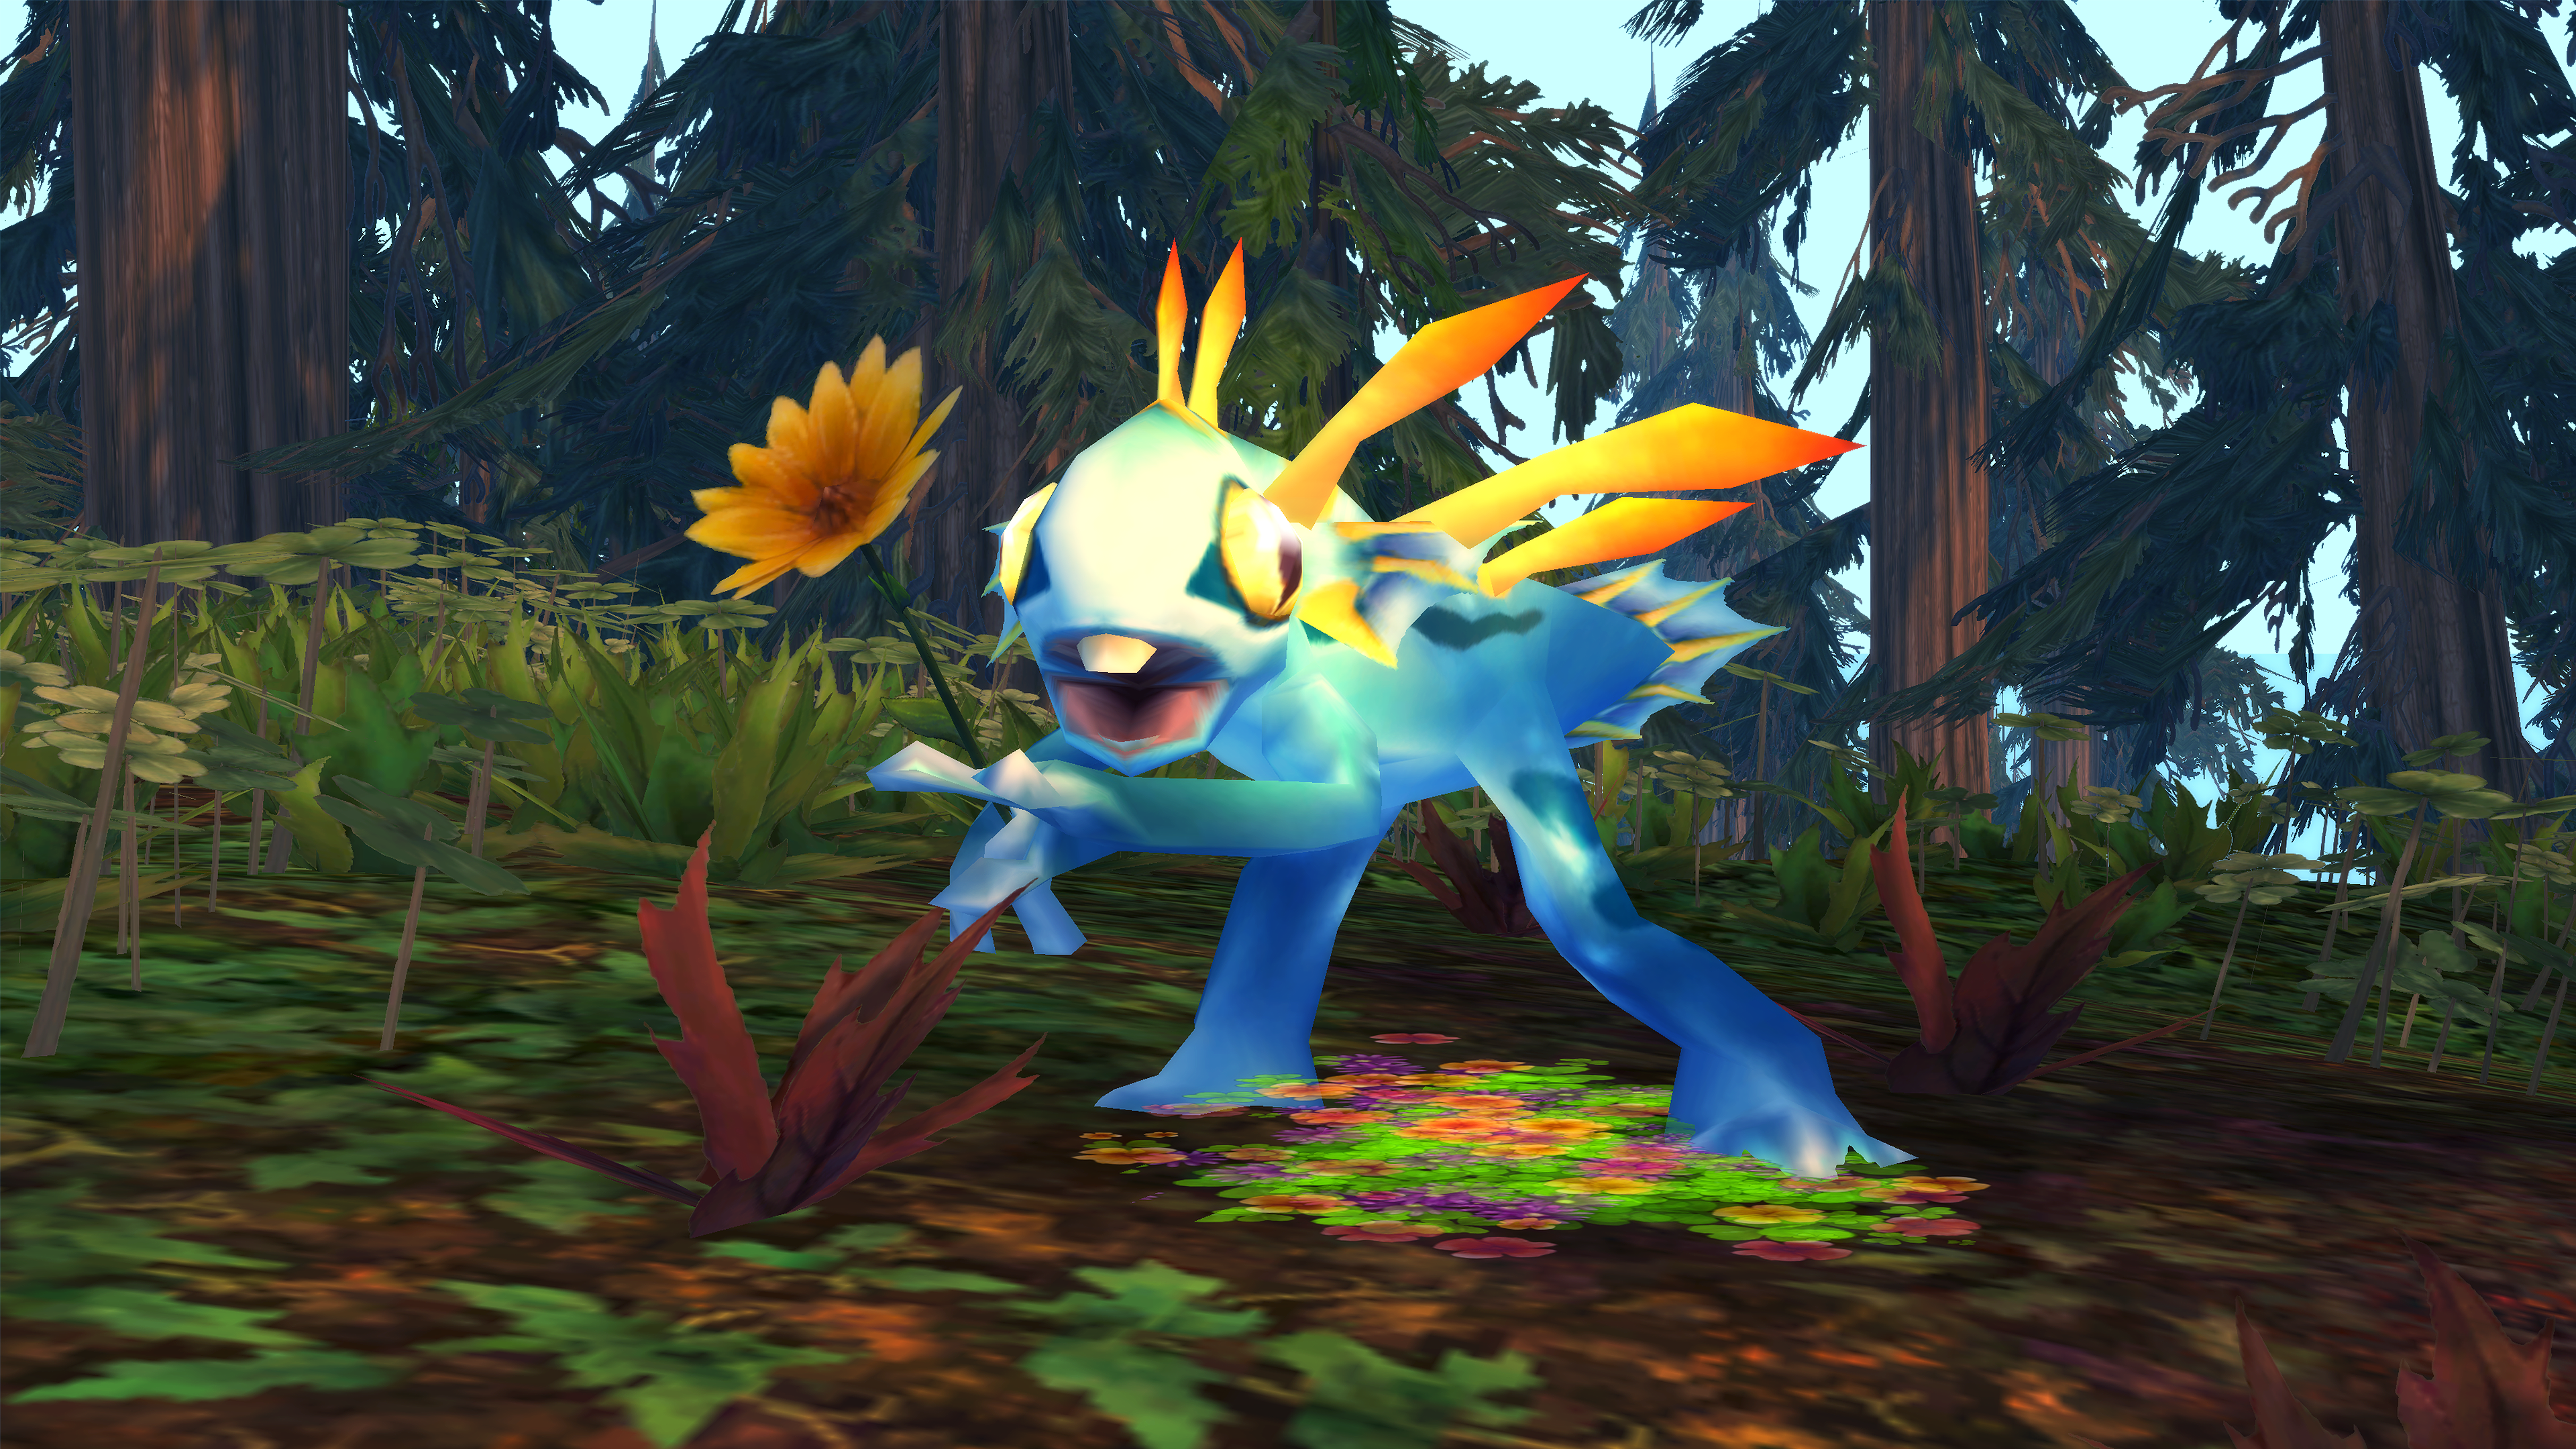 Flurky holding a sunflower standing in small clearing with a wooded area behind